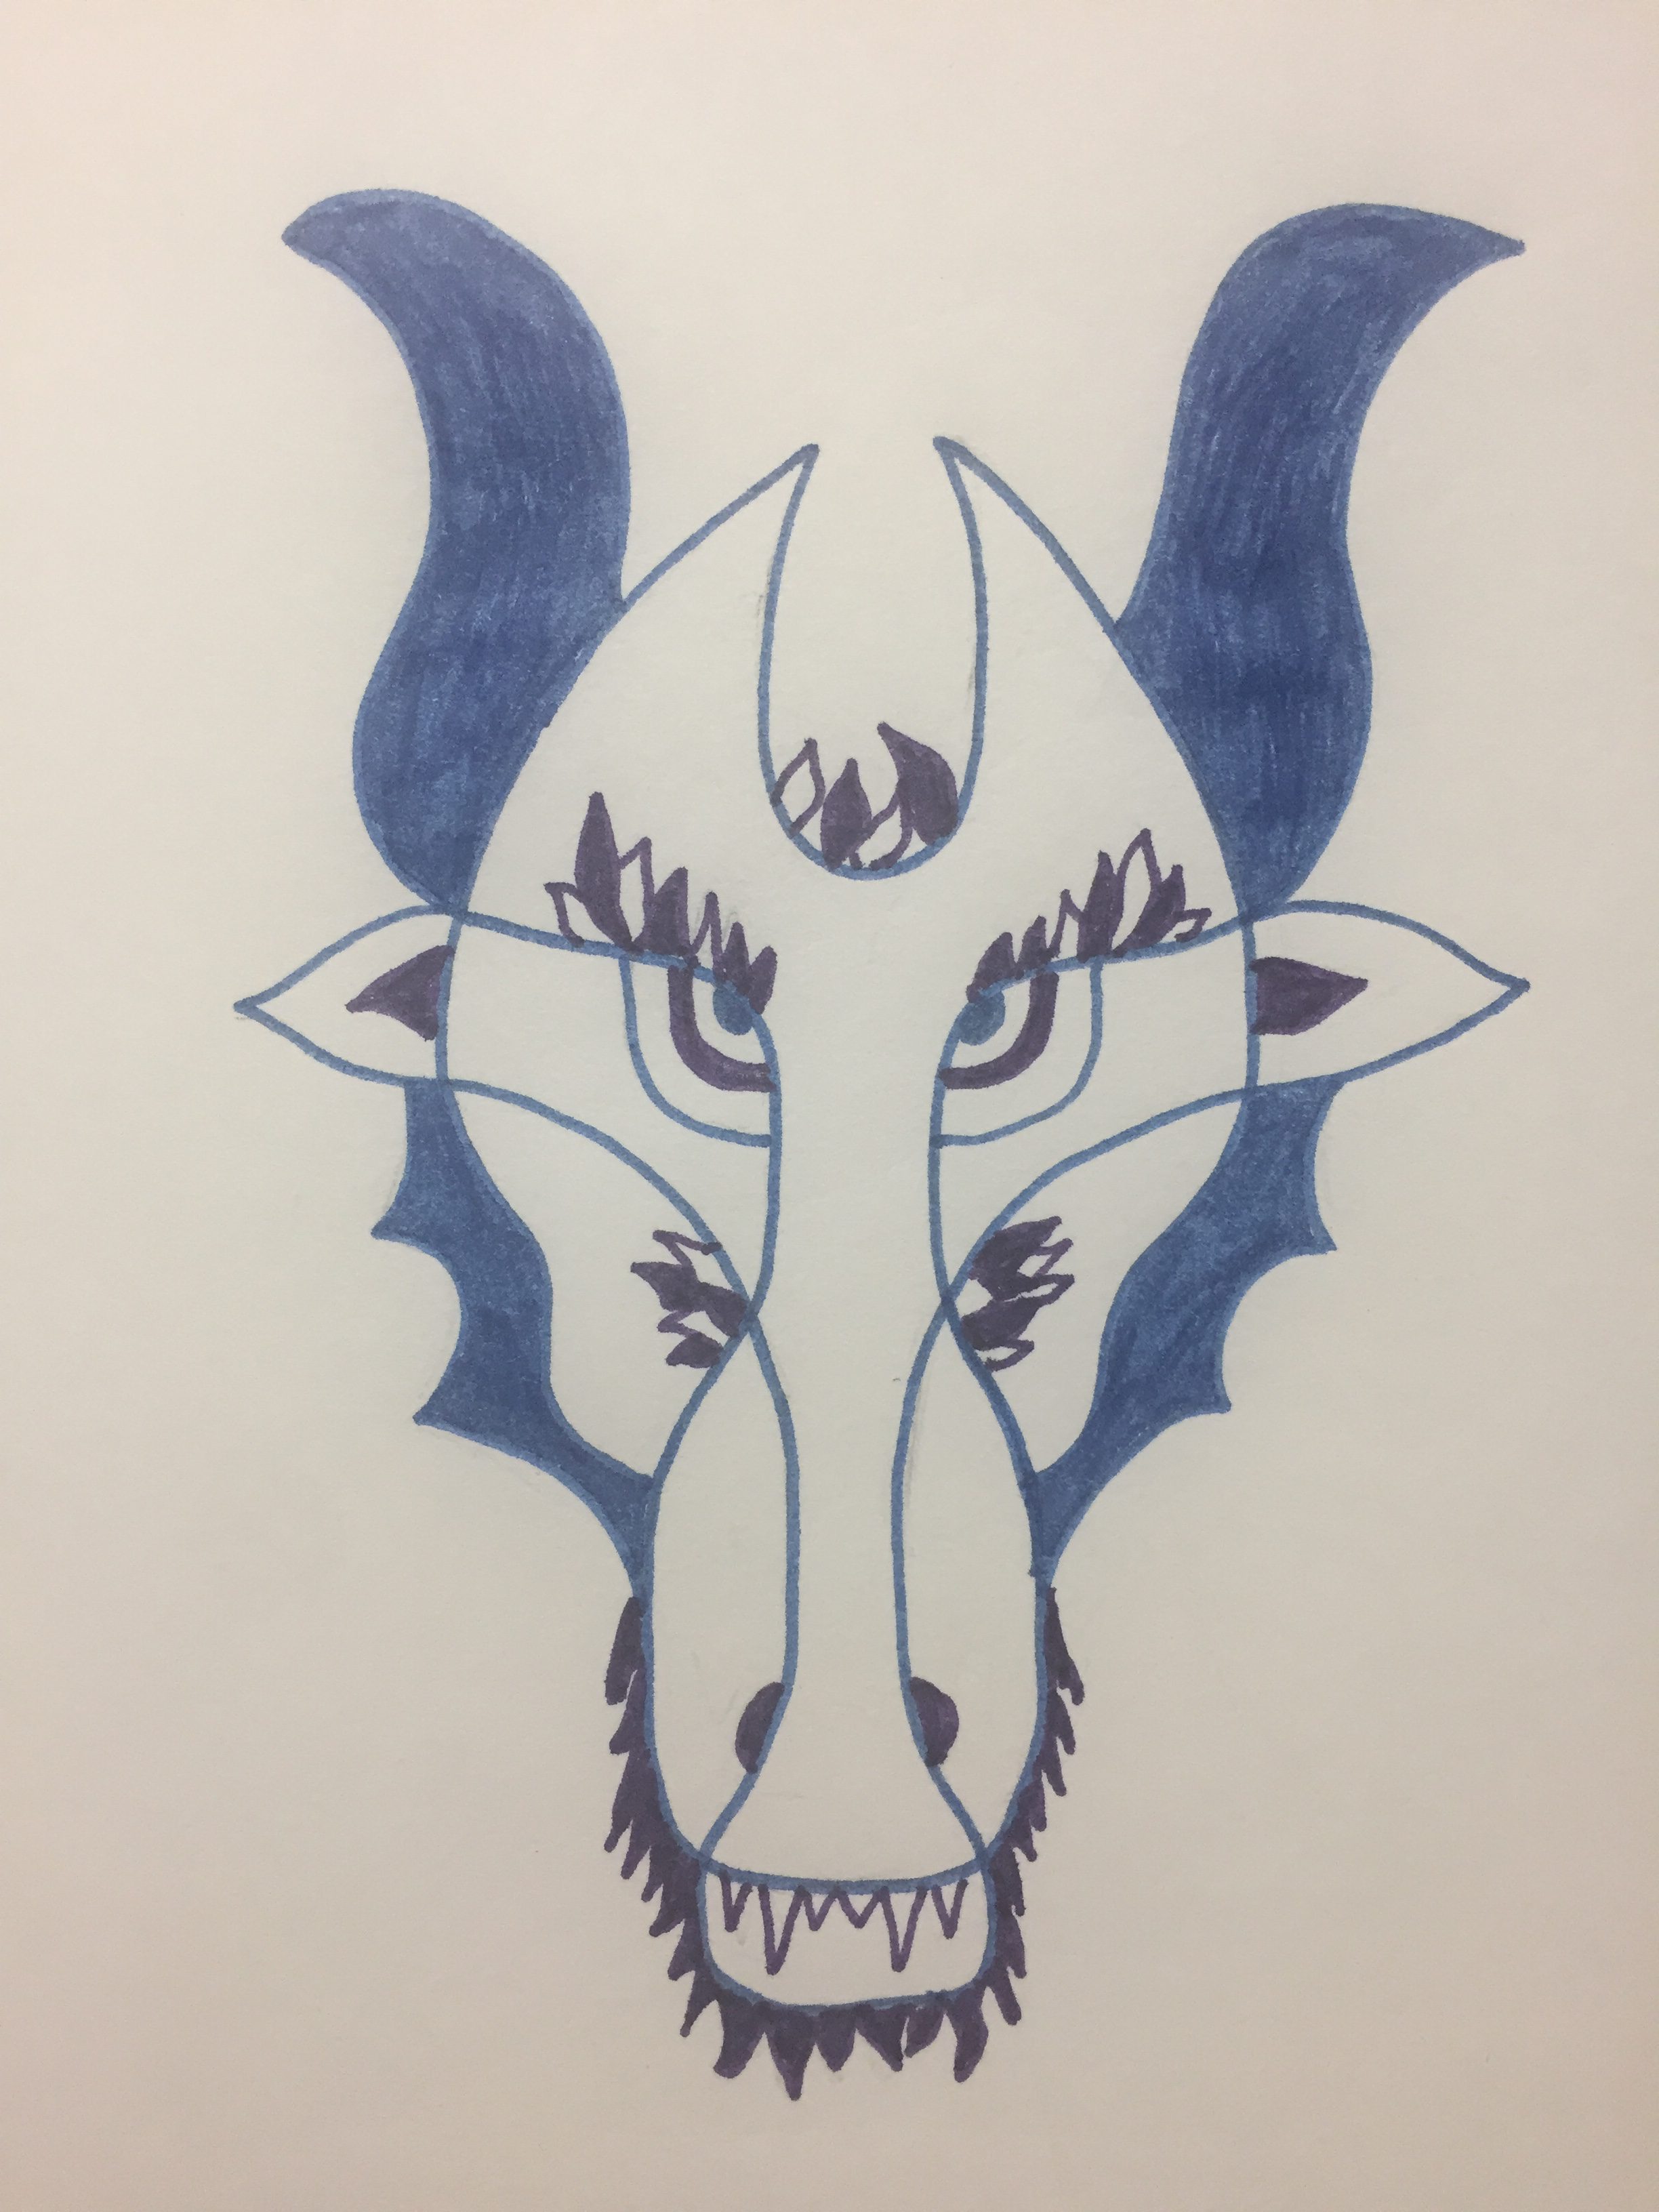 Head of dragon in purple and blue